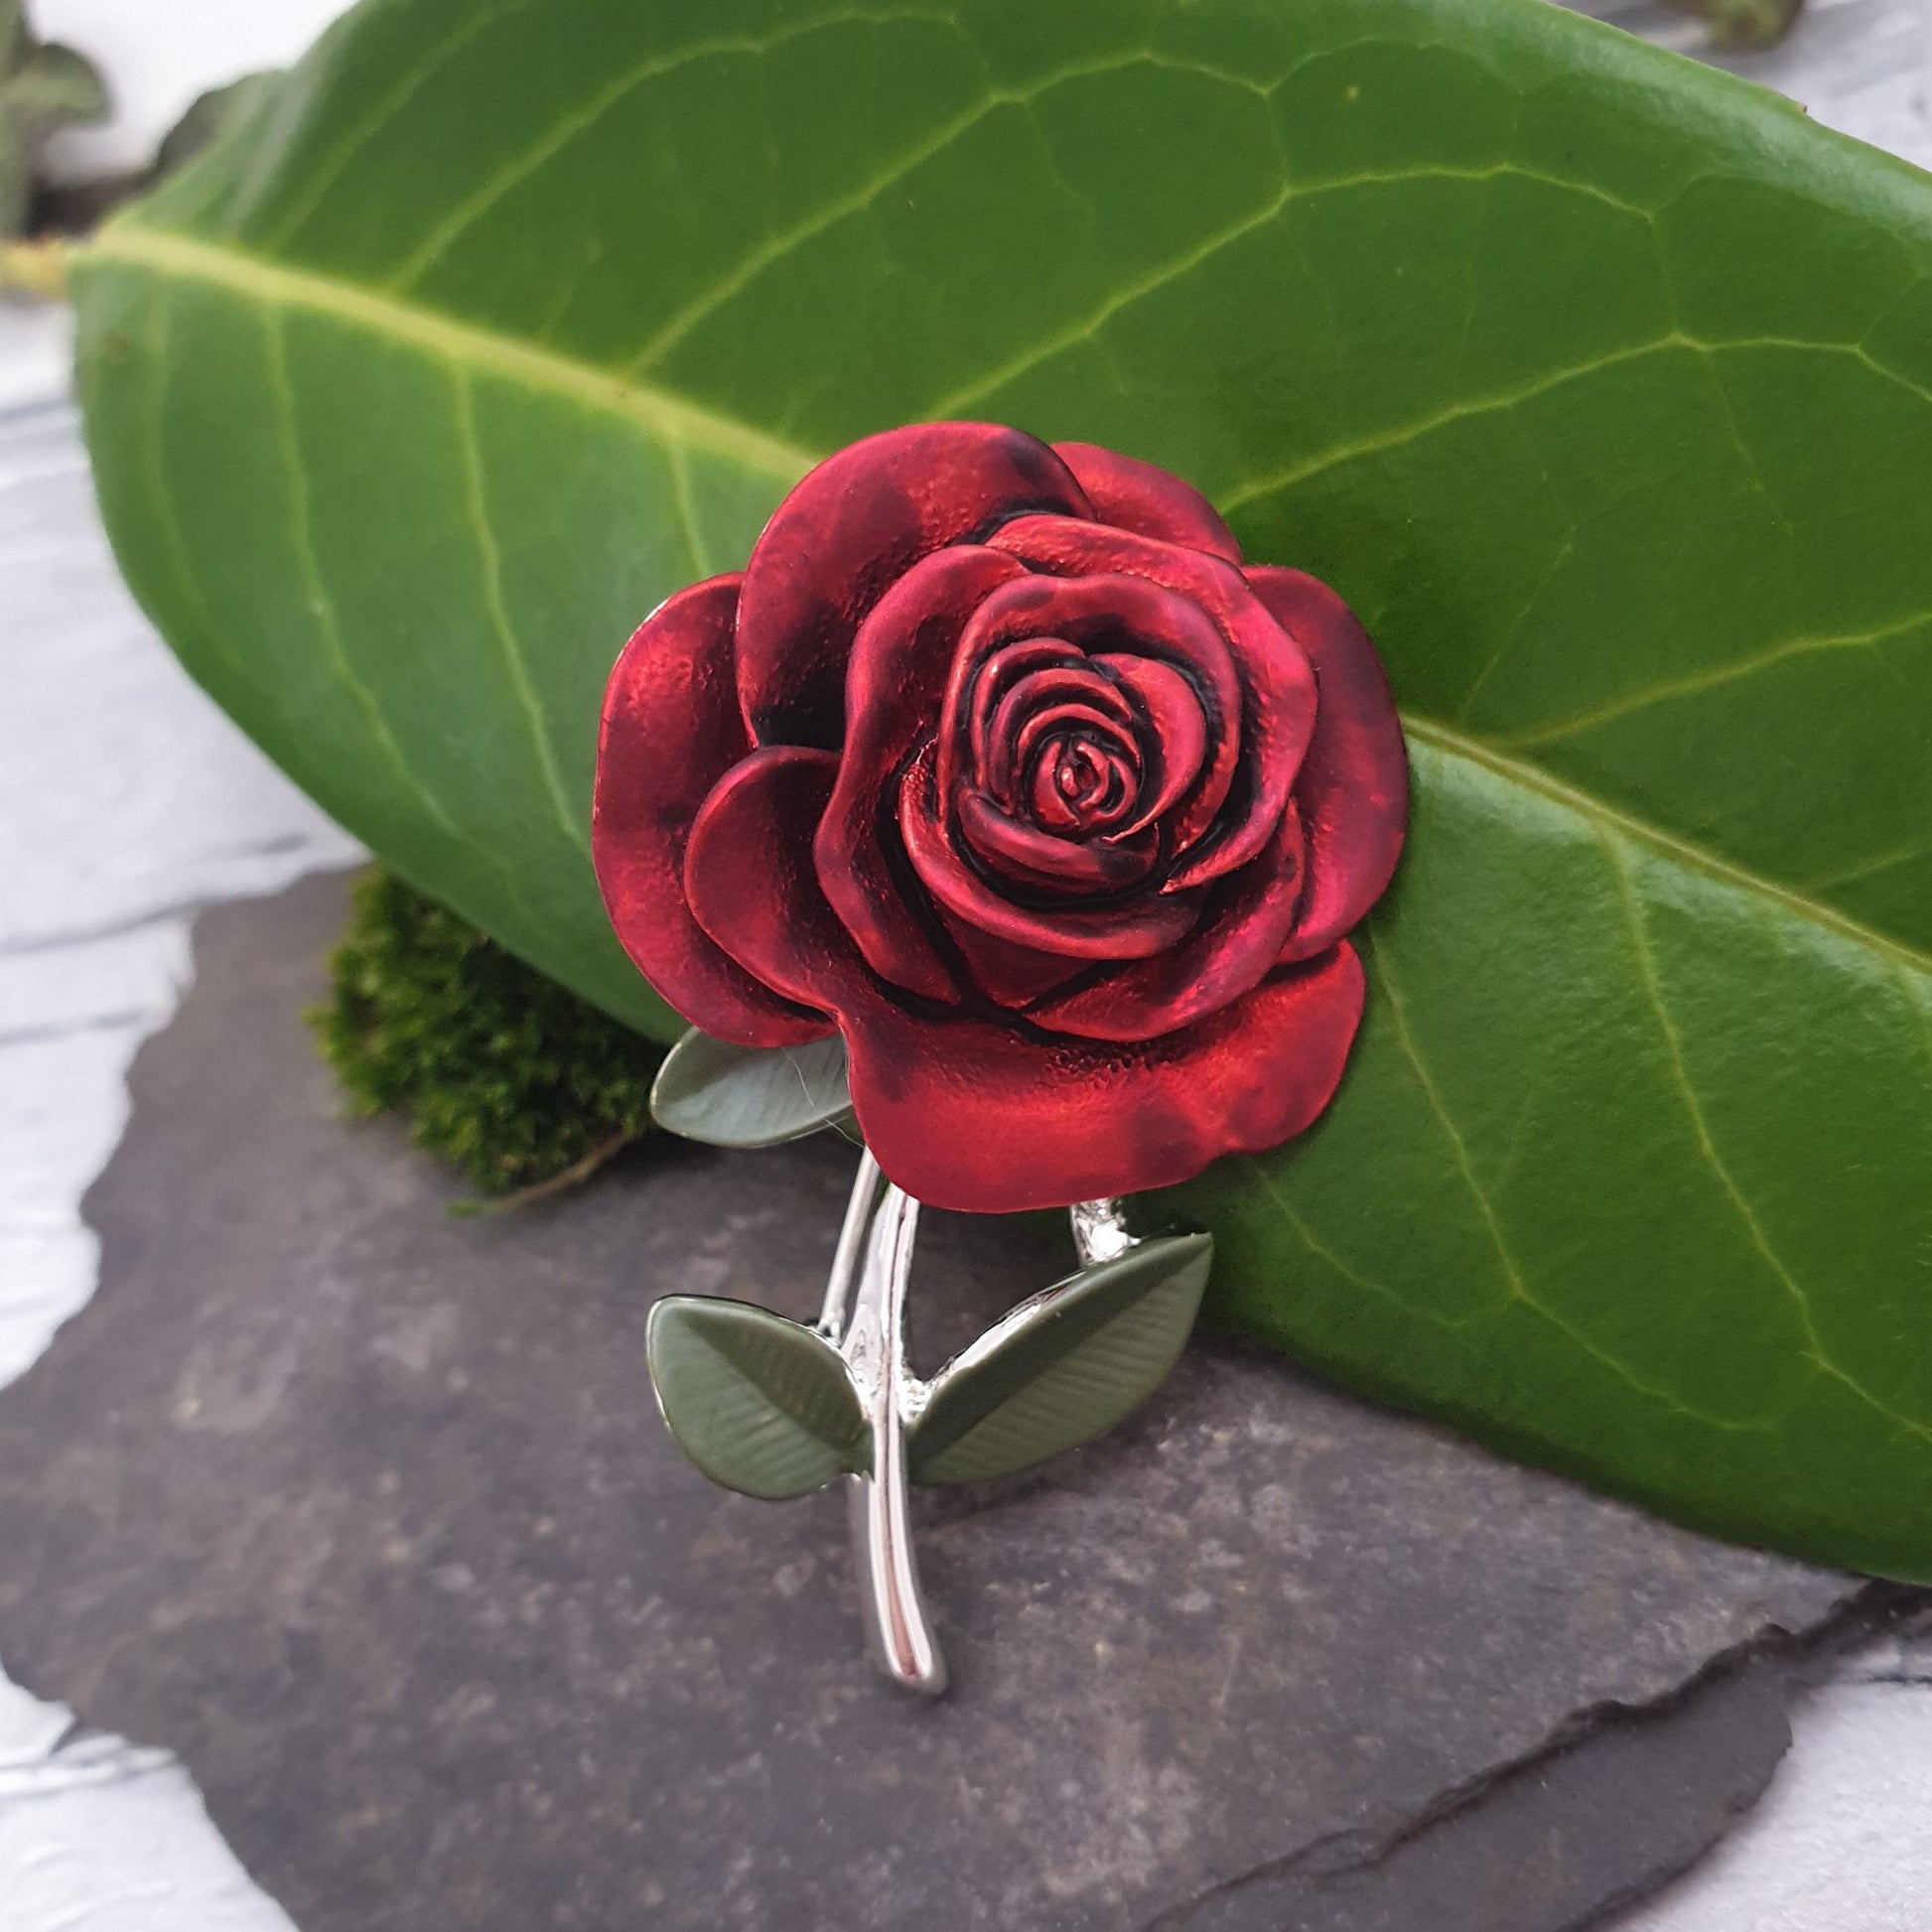 Photo of a single red rose with a silver stem and green leaves as a ladies brooch